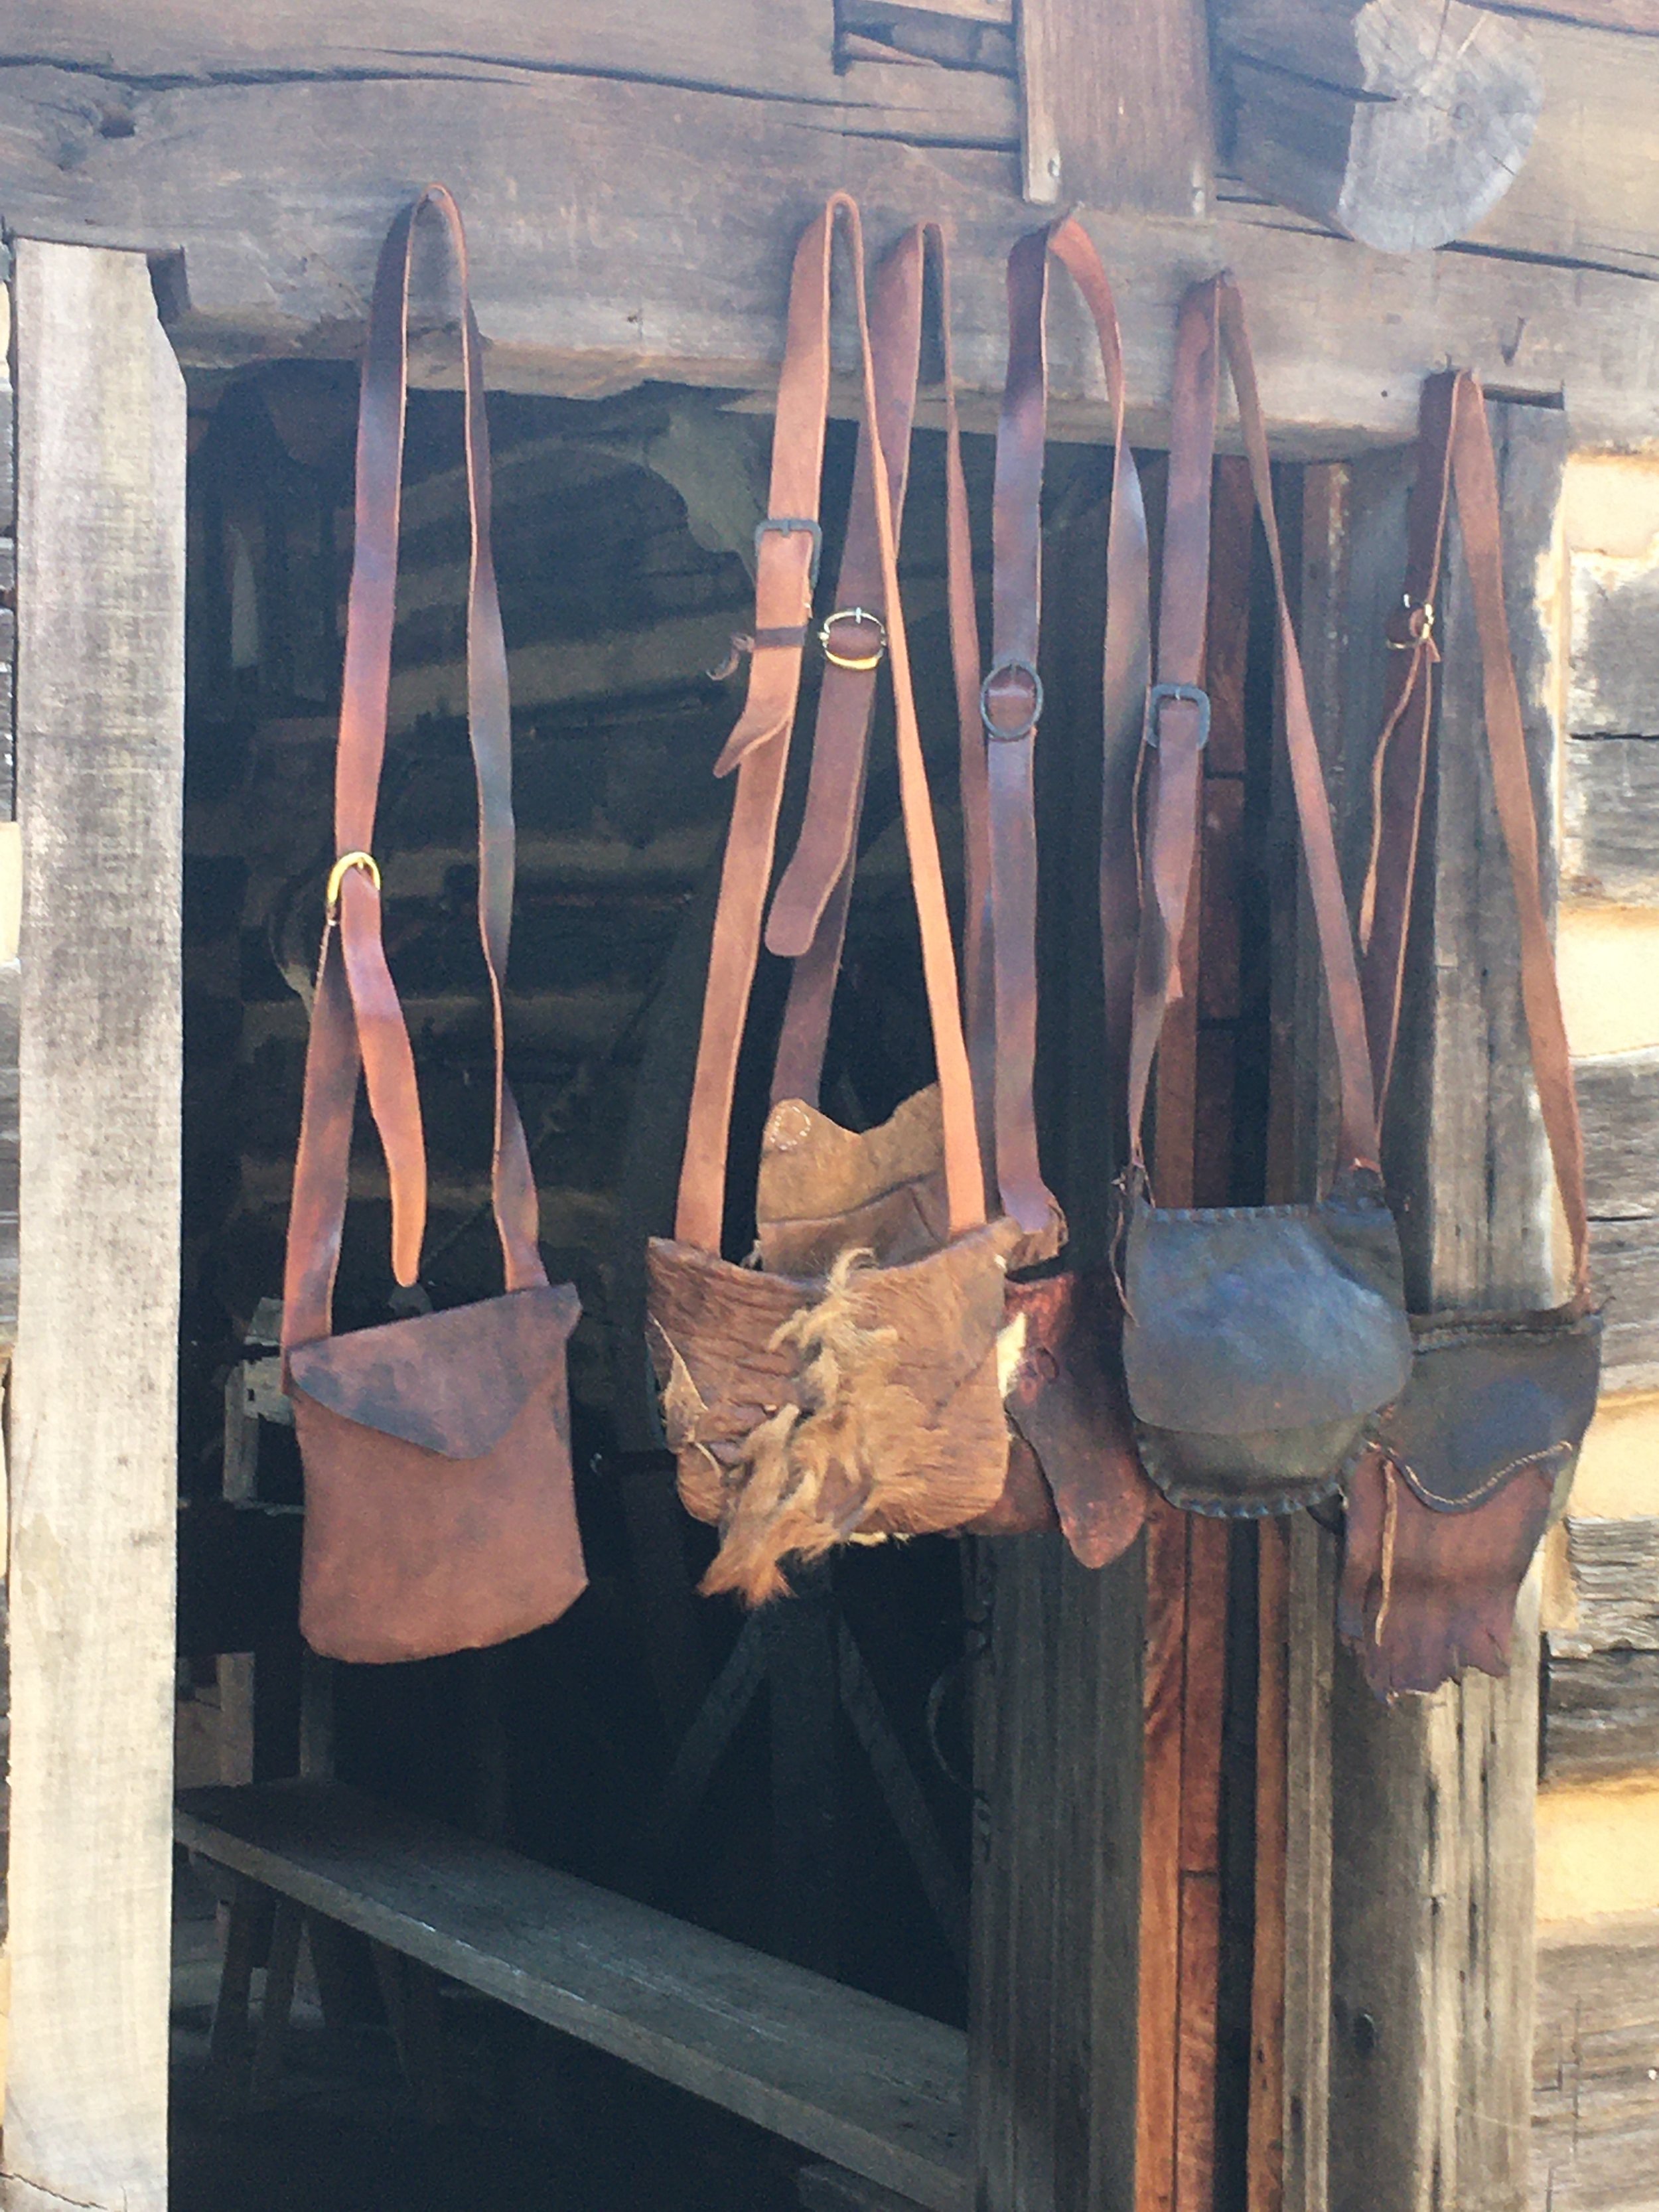 The “Hunting Bag” of the 18th-19th Century American Frontier